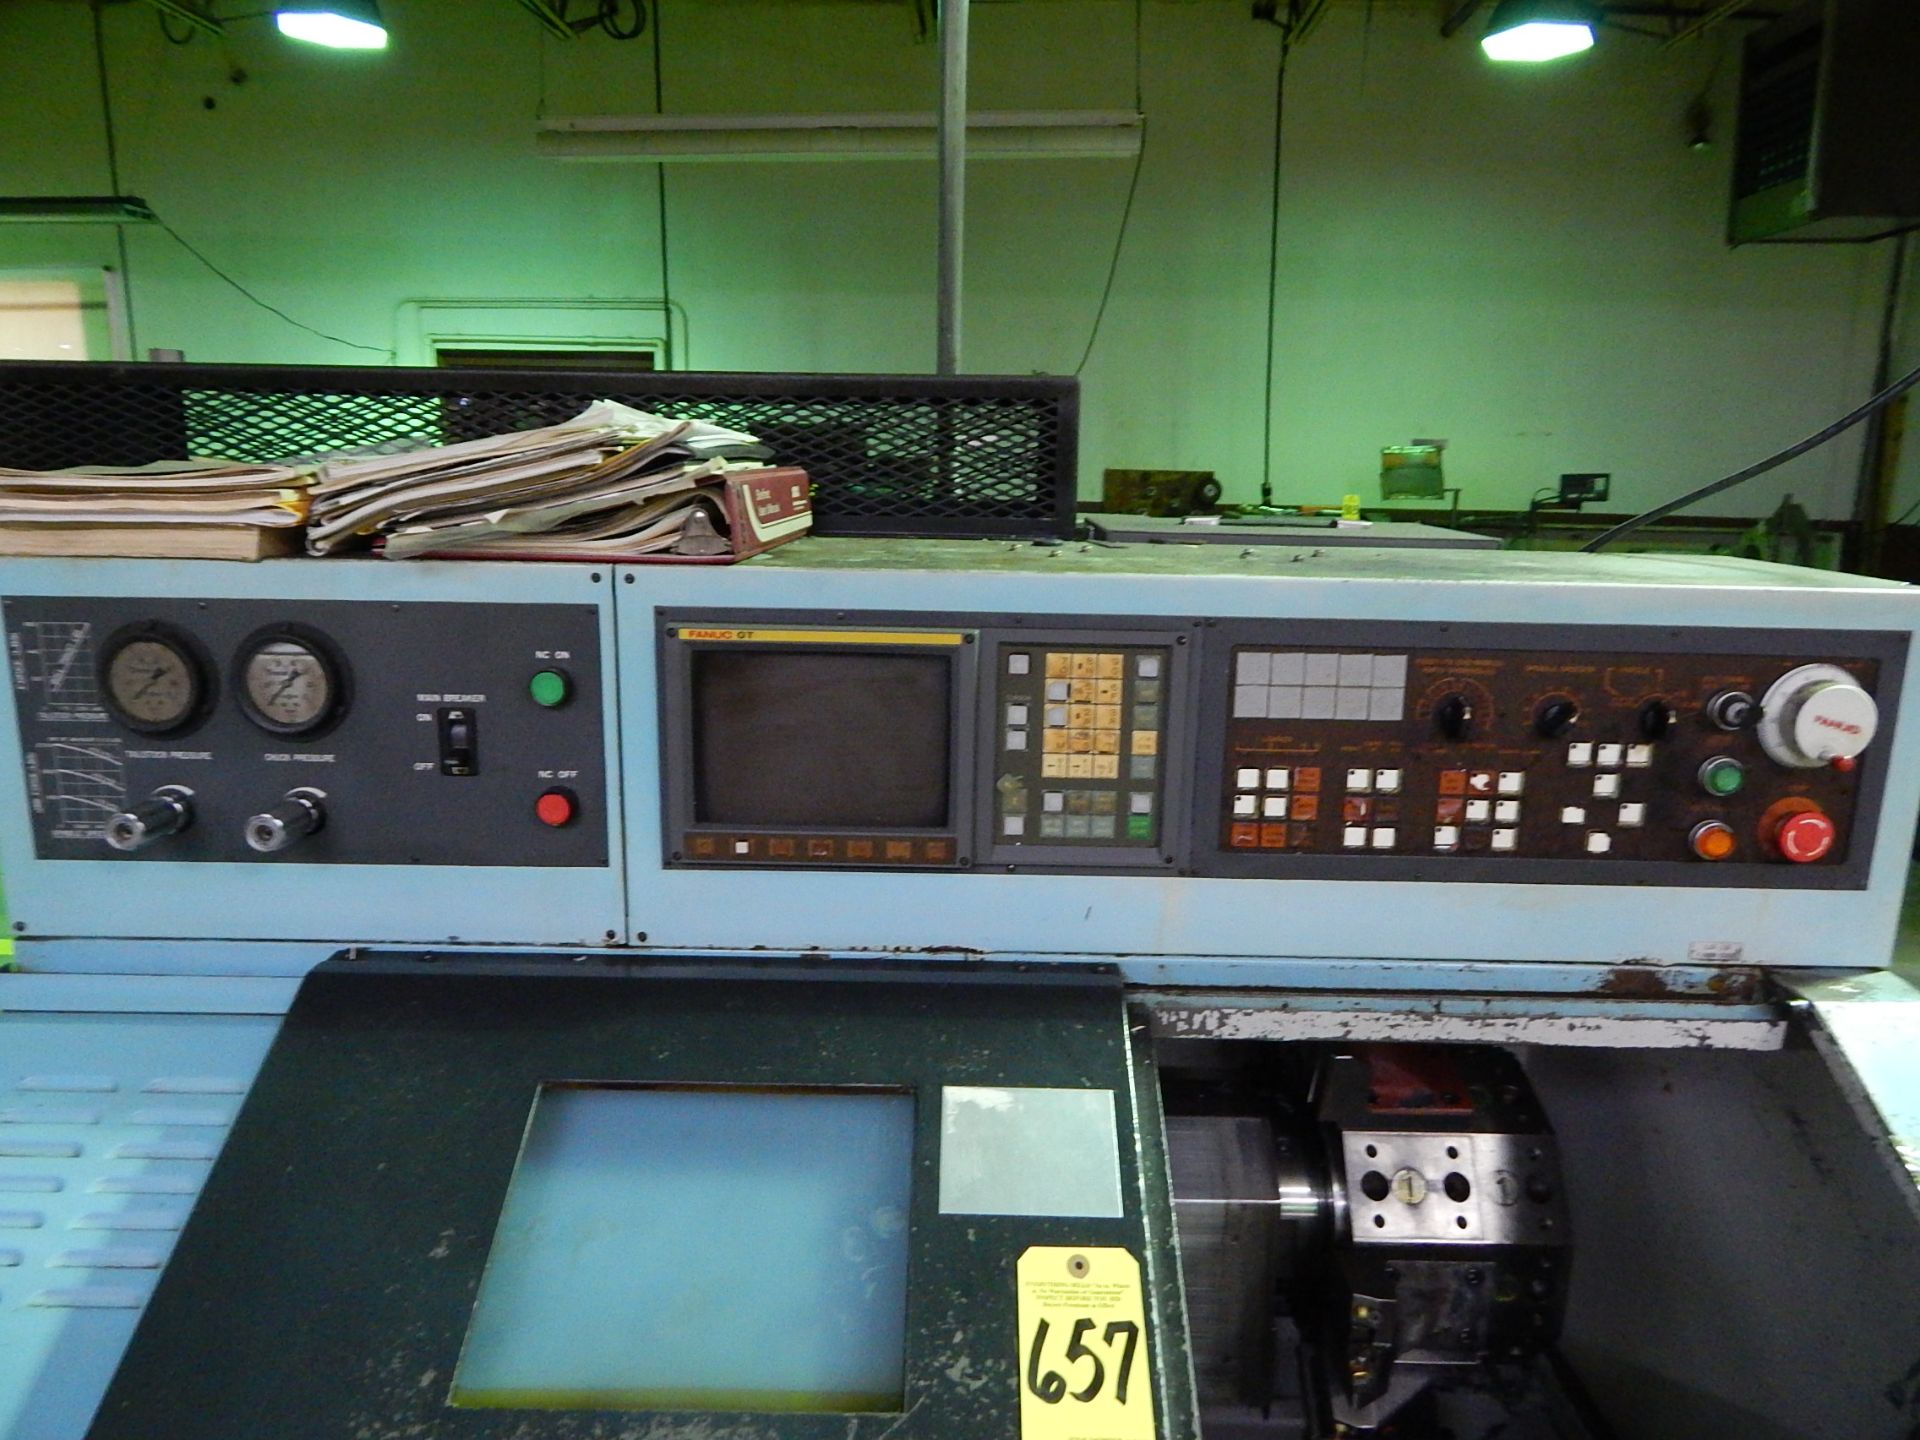 Warner & Swasey Model WSC-6 CNC Turning Center, s/n 1488326, Fanuc 0-T CNC Control, 1.85 In. - Image 7 of 8